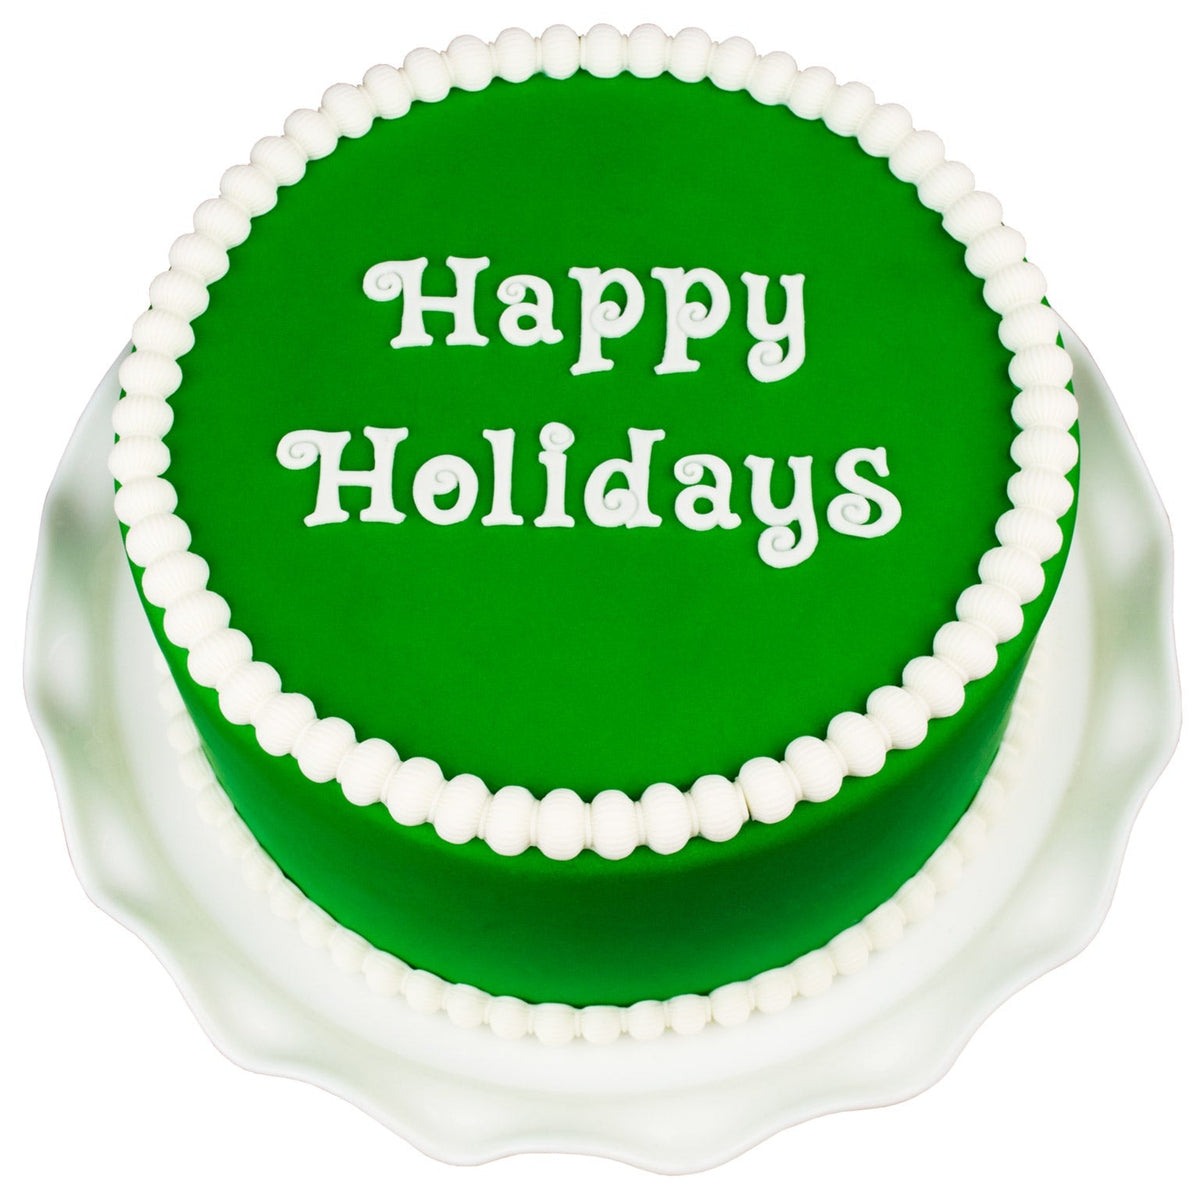 Decorated Cake using Happy Holidays Flexabet Food Safe Silicone Letter Maker by Marvelous Molds